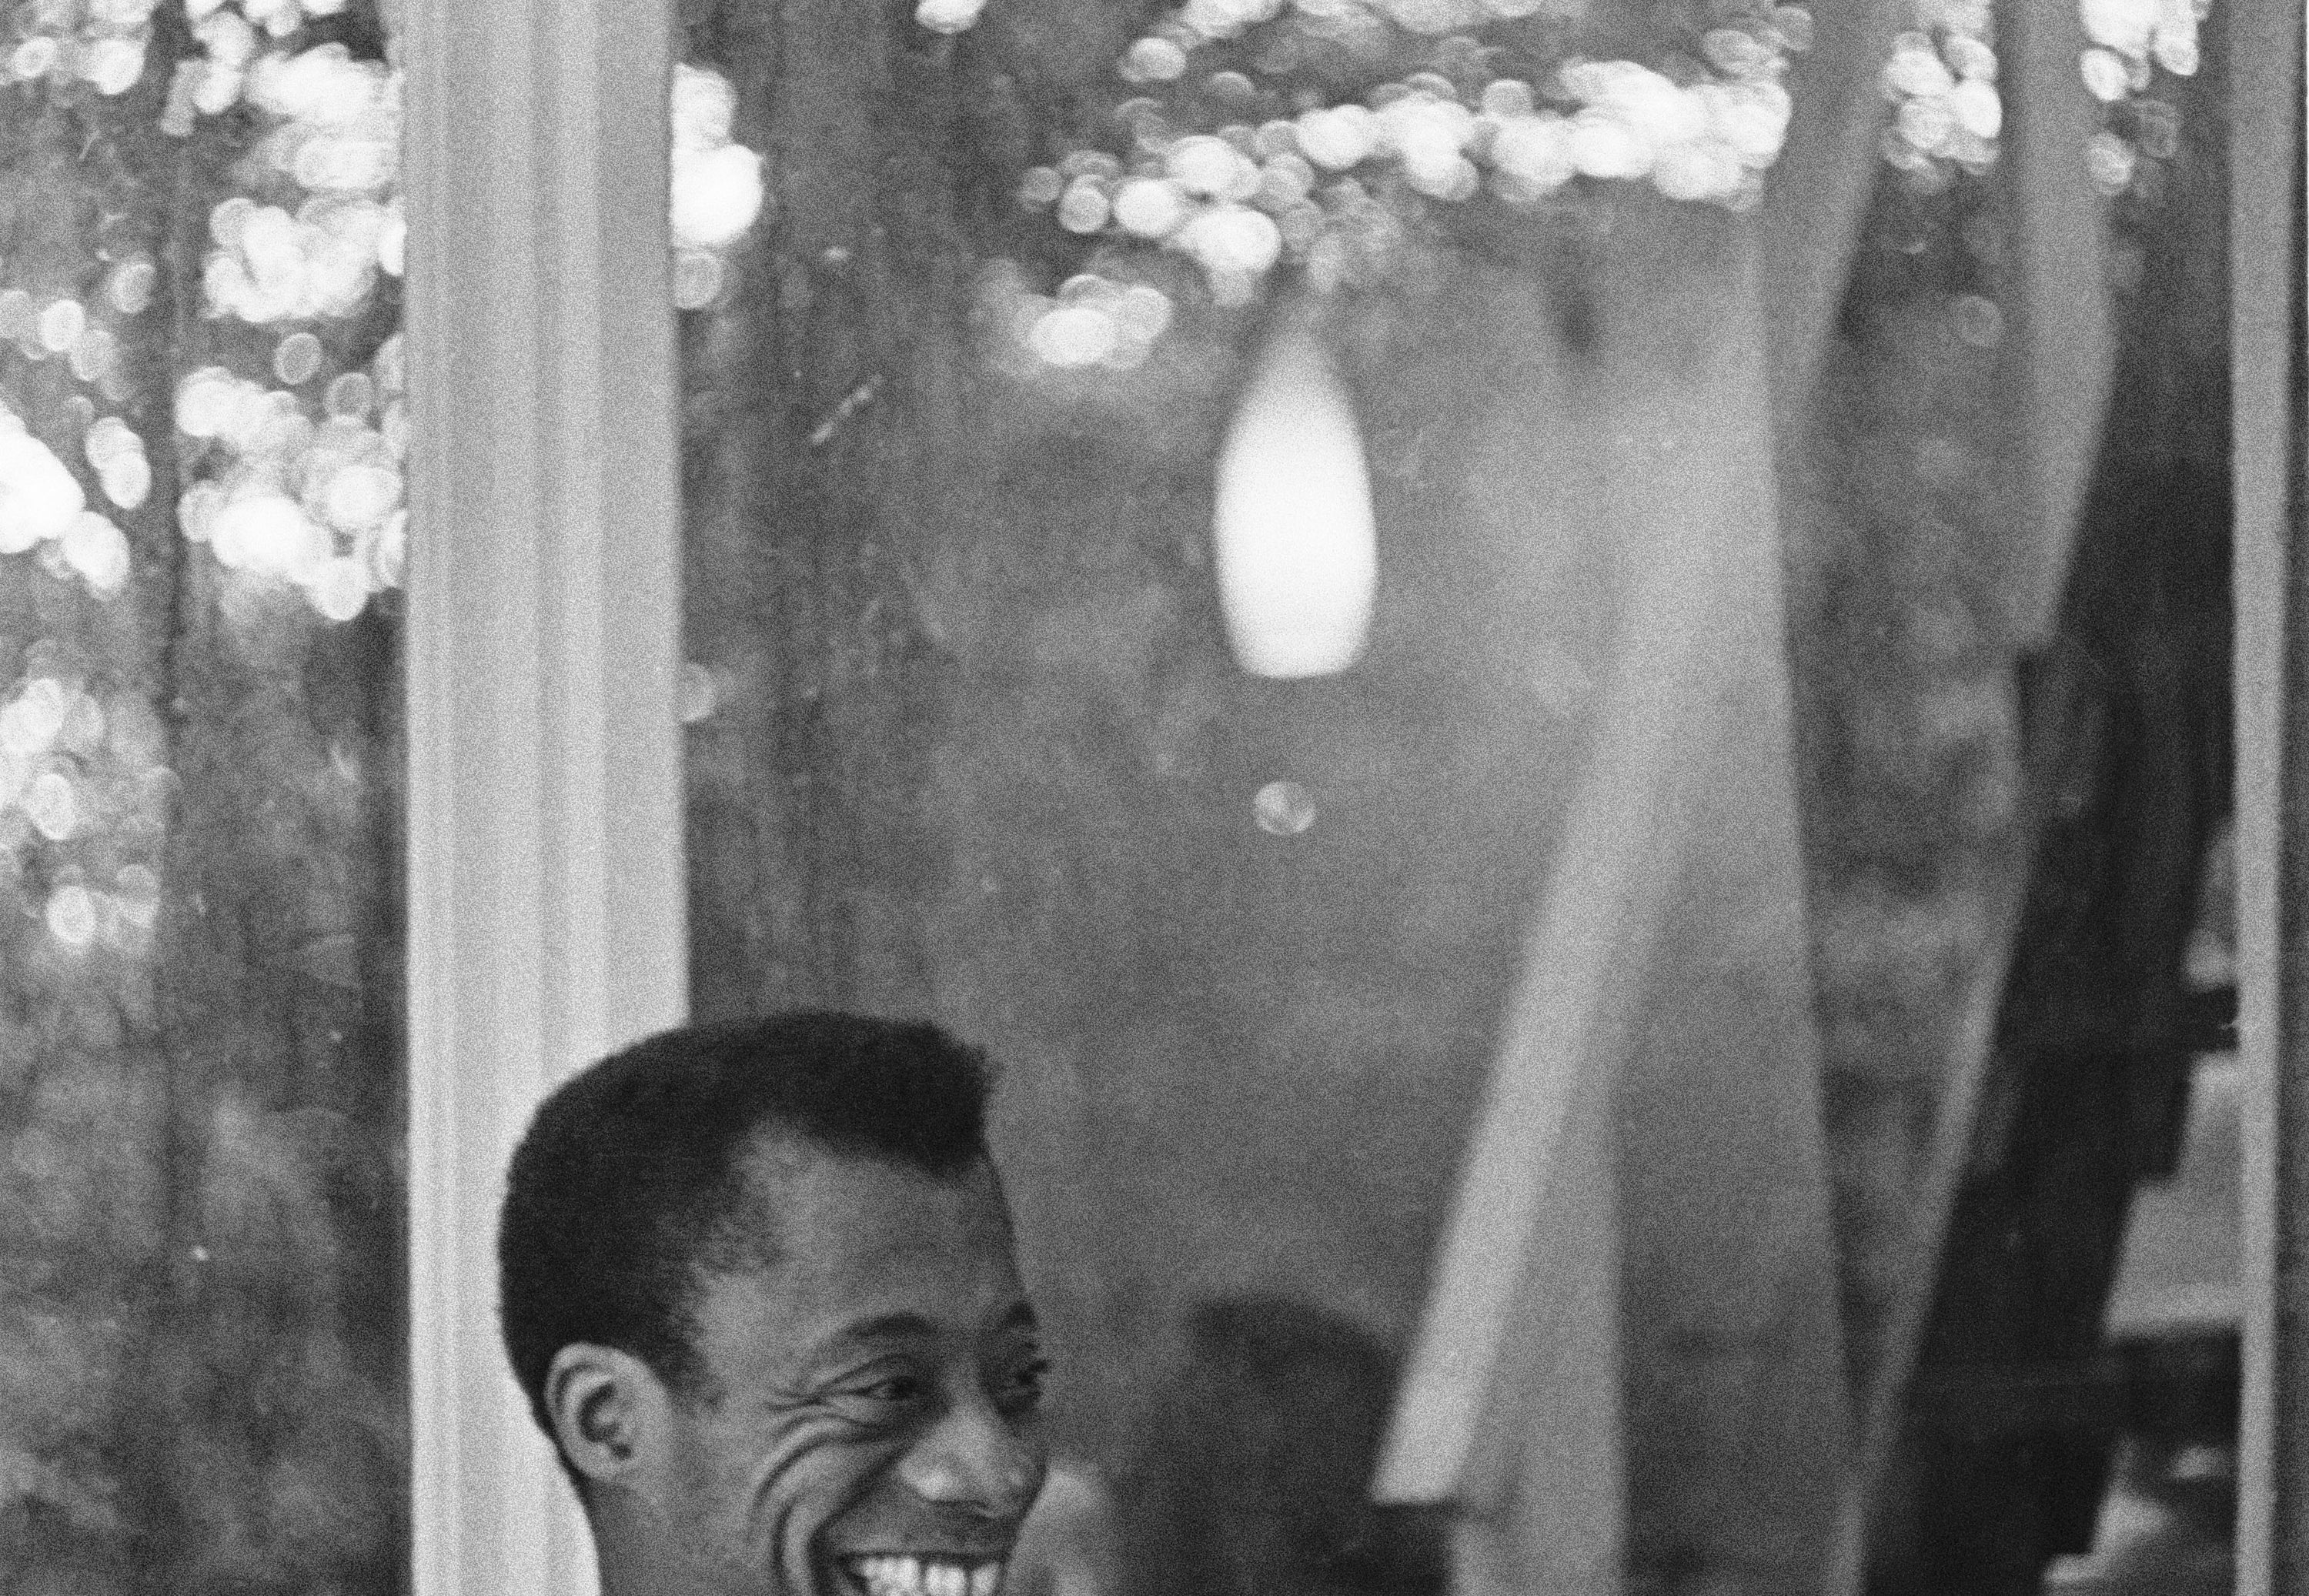 James Baldwin smiling while relaxing on a porch